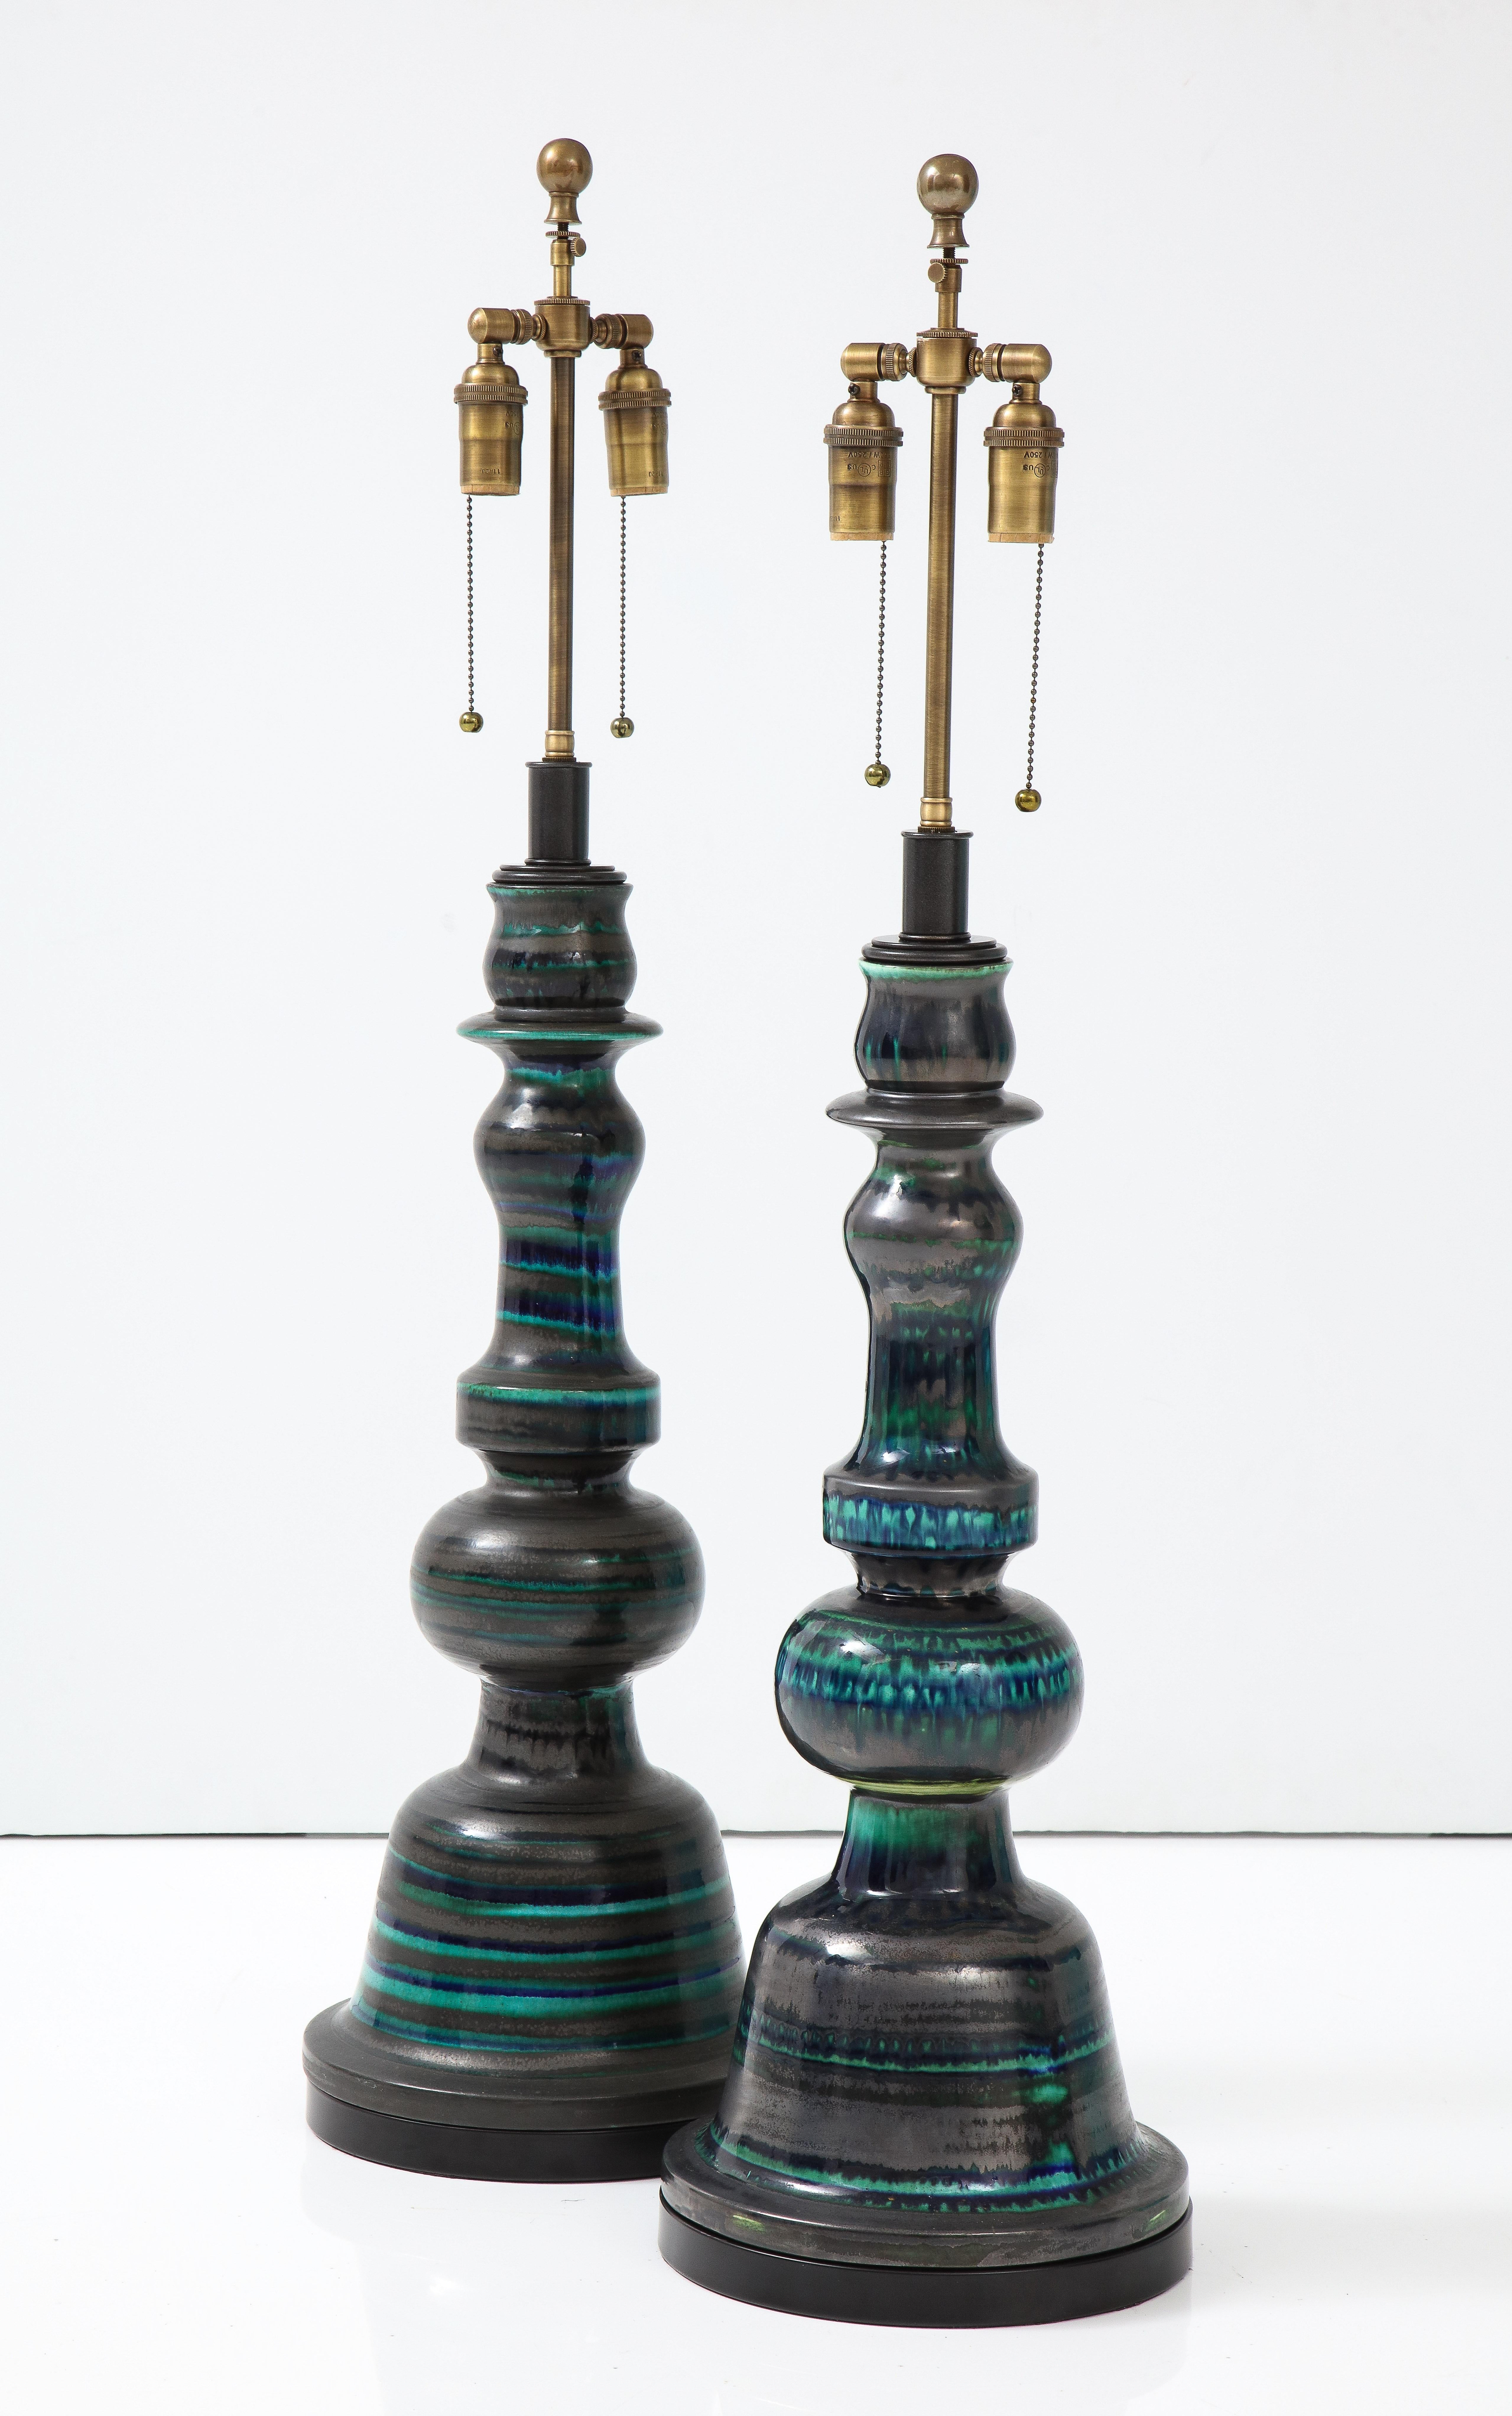 Stunning Pair of large ceramic lamps.
The Totem shaped lamps are slightly different in size as they are handmade.
They have a striped glazed finish and they are Newly rewired with adjustable antique bronze double clusters that take standard size